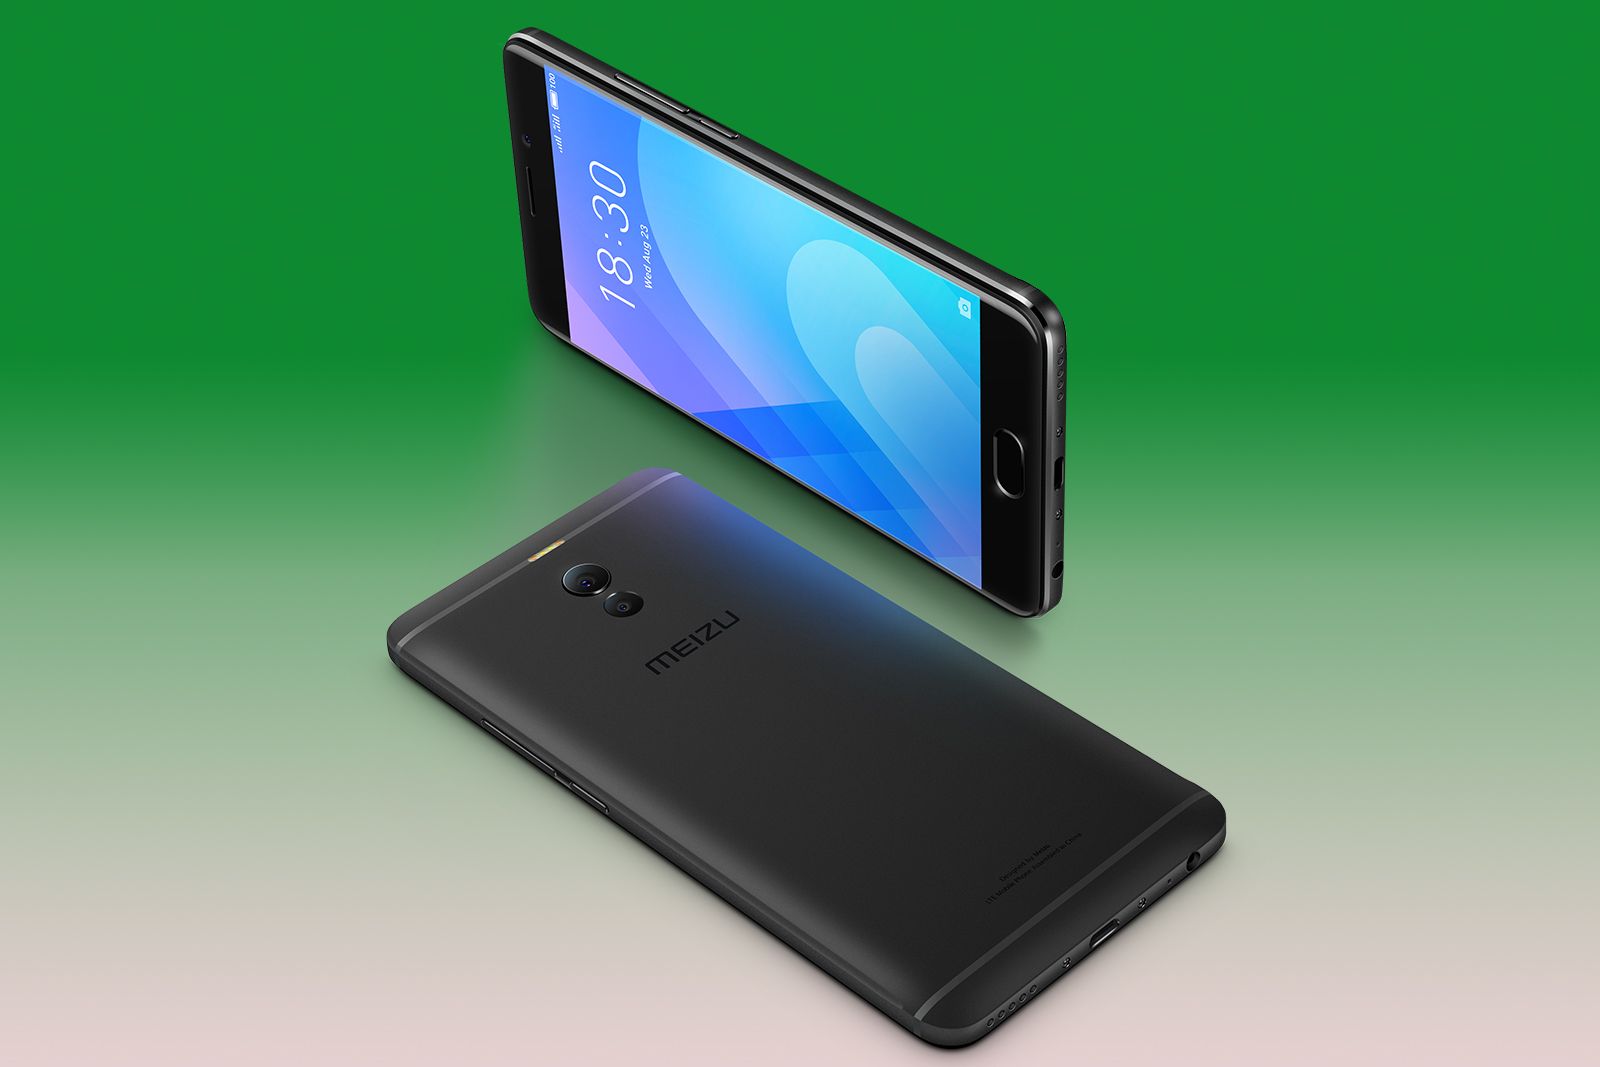 Meizu announces M6 Note entry-level smartphone with dual-lens camera image 1